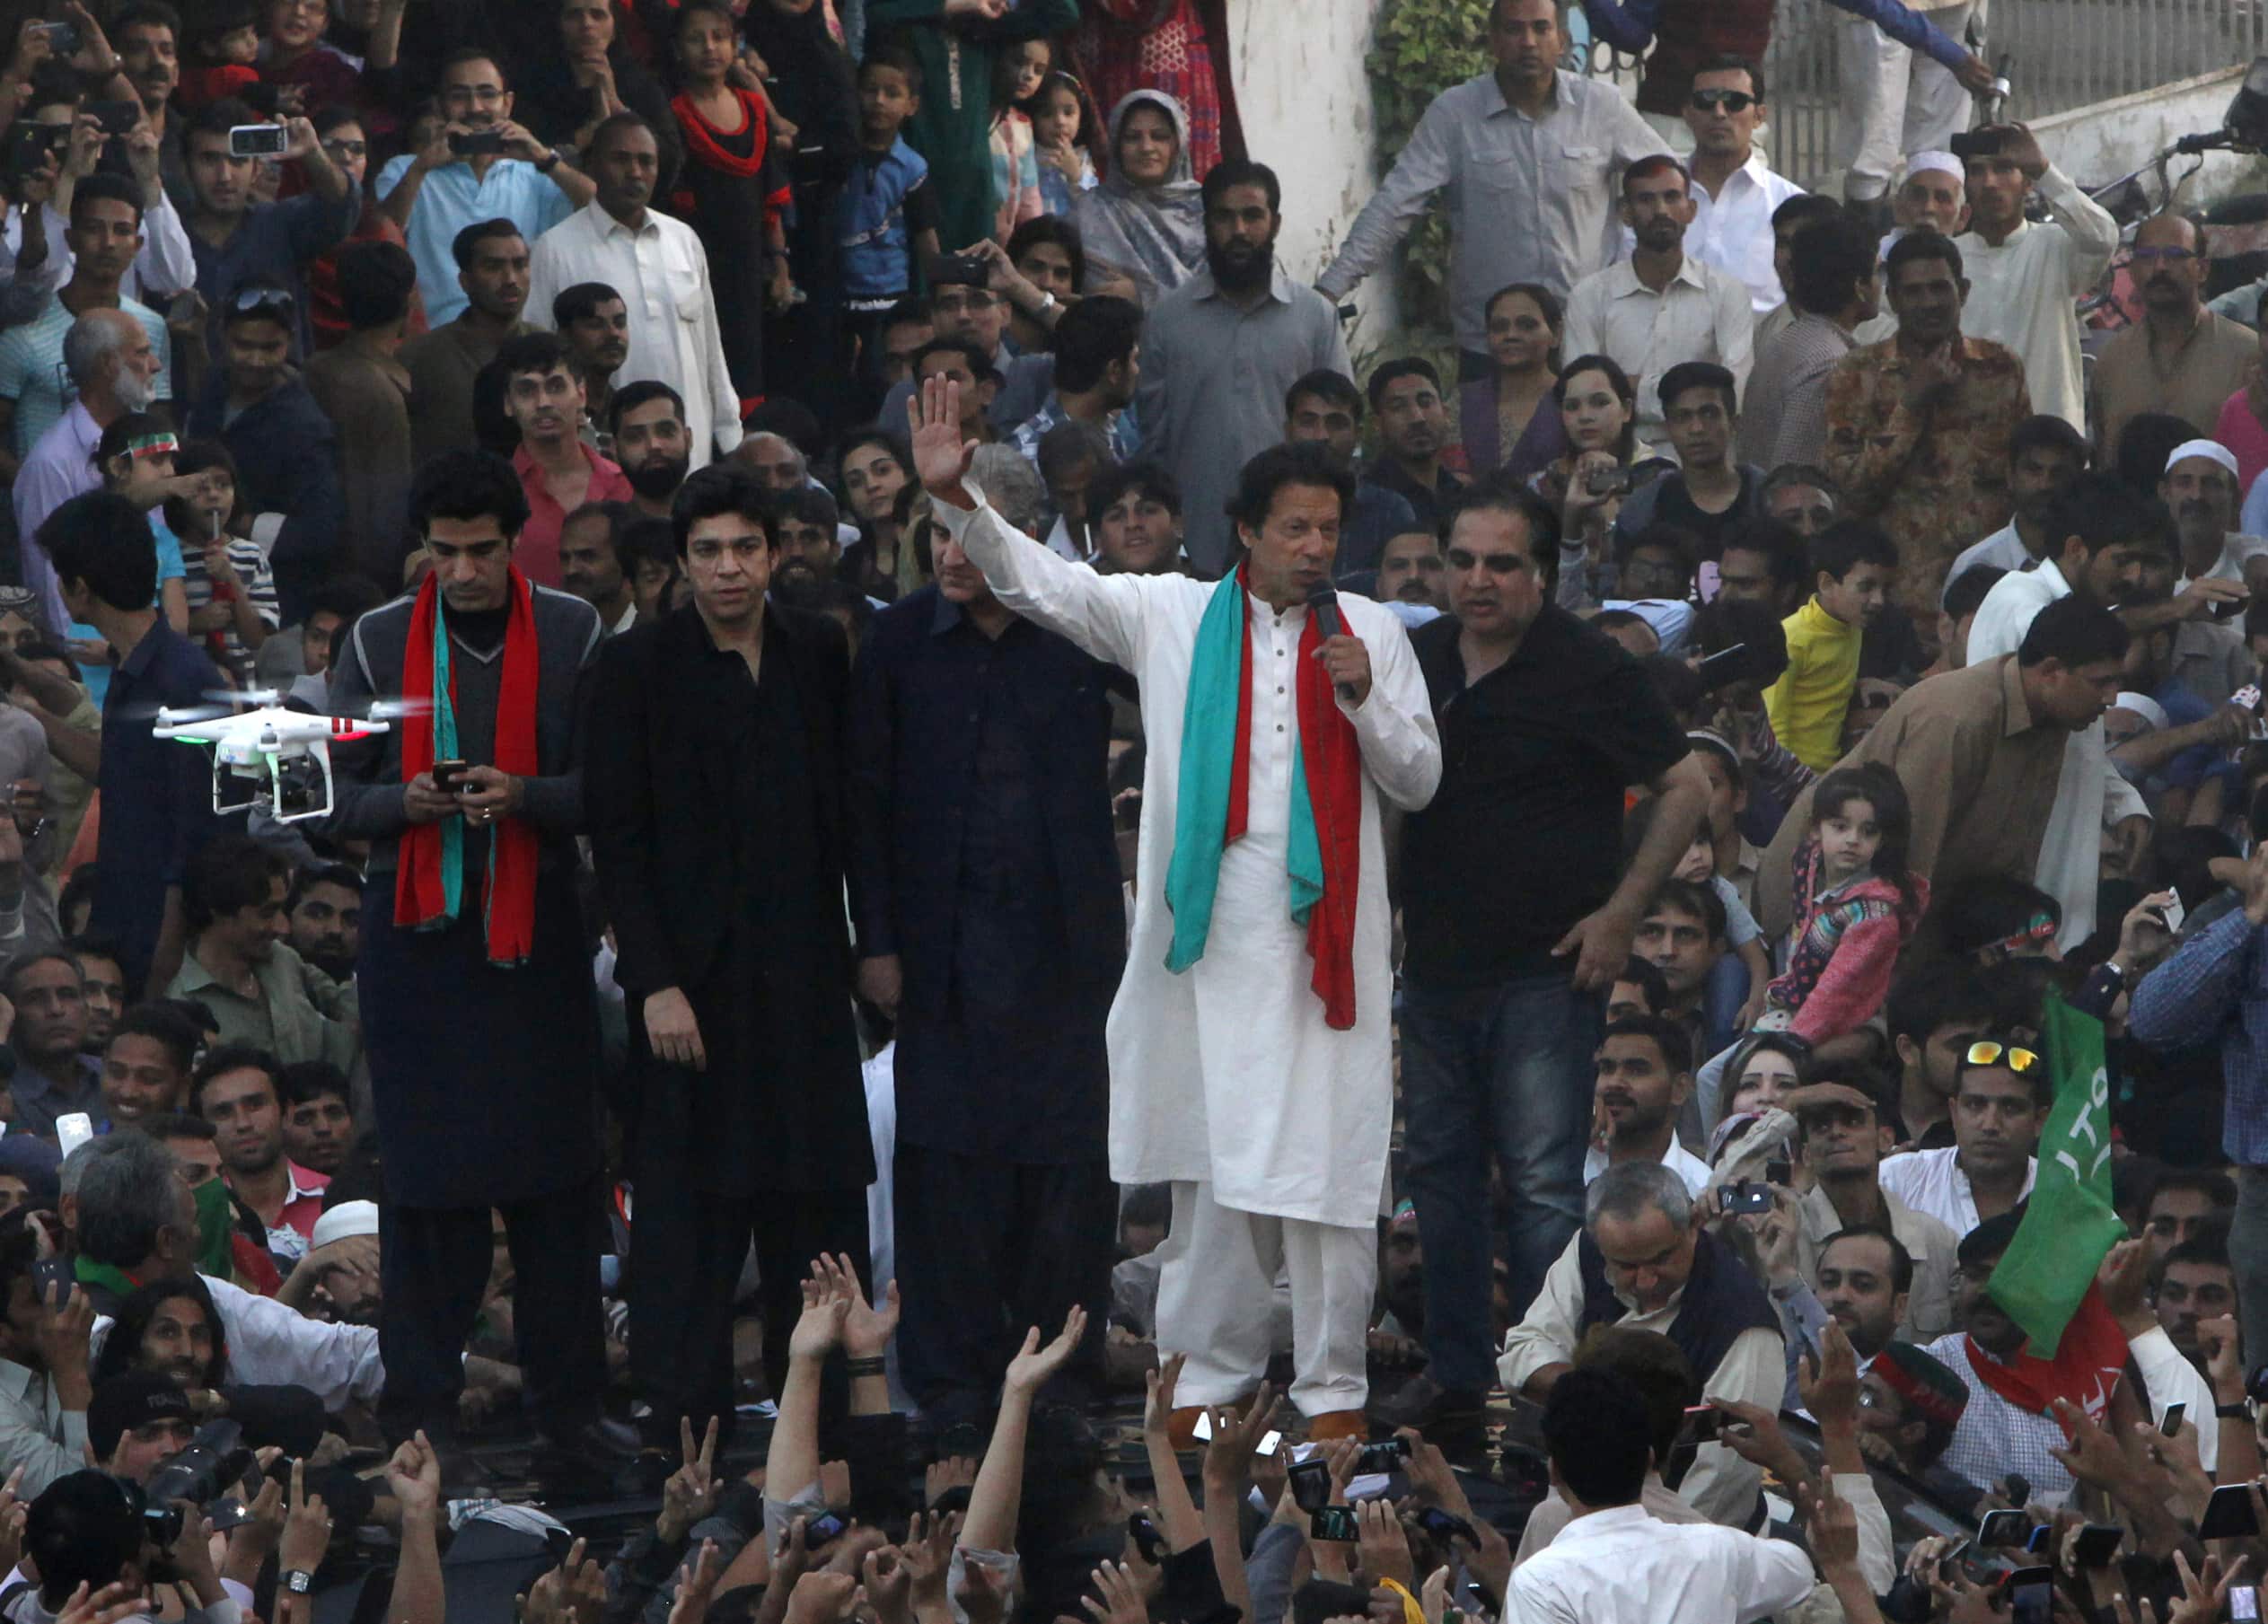 Imran Khan, cricketer-turned-politician and chairman of the Pakistan Tehreek-e-Insaf (PTI) political party, gestures while speaking to his supporters during an anti-government rally in Karachi, 12 December 2014, REUTERS/Akhtar Soomro